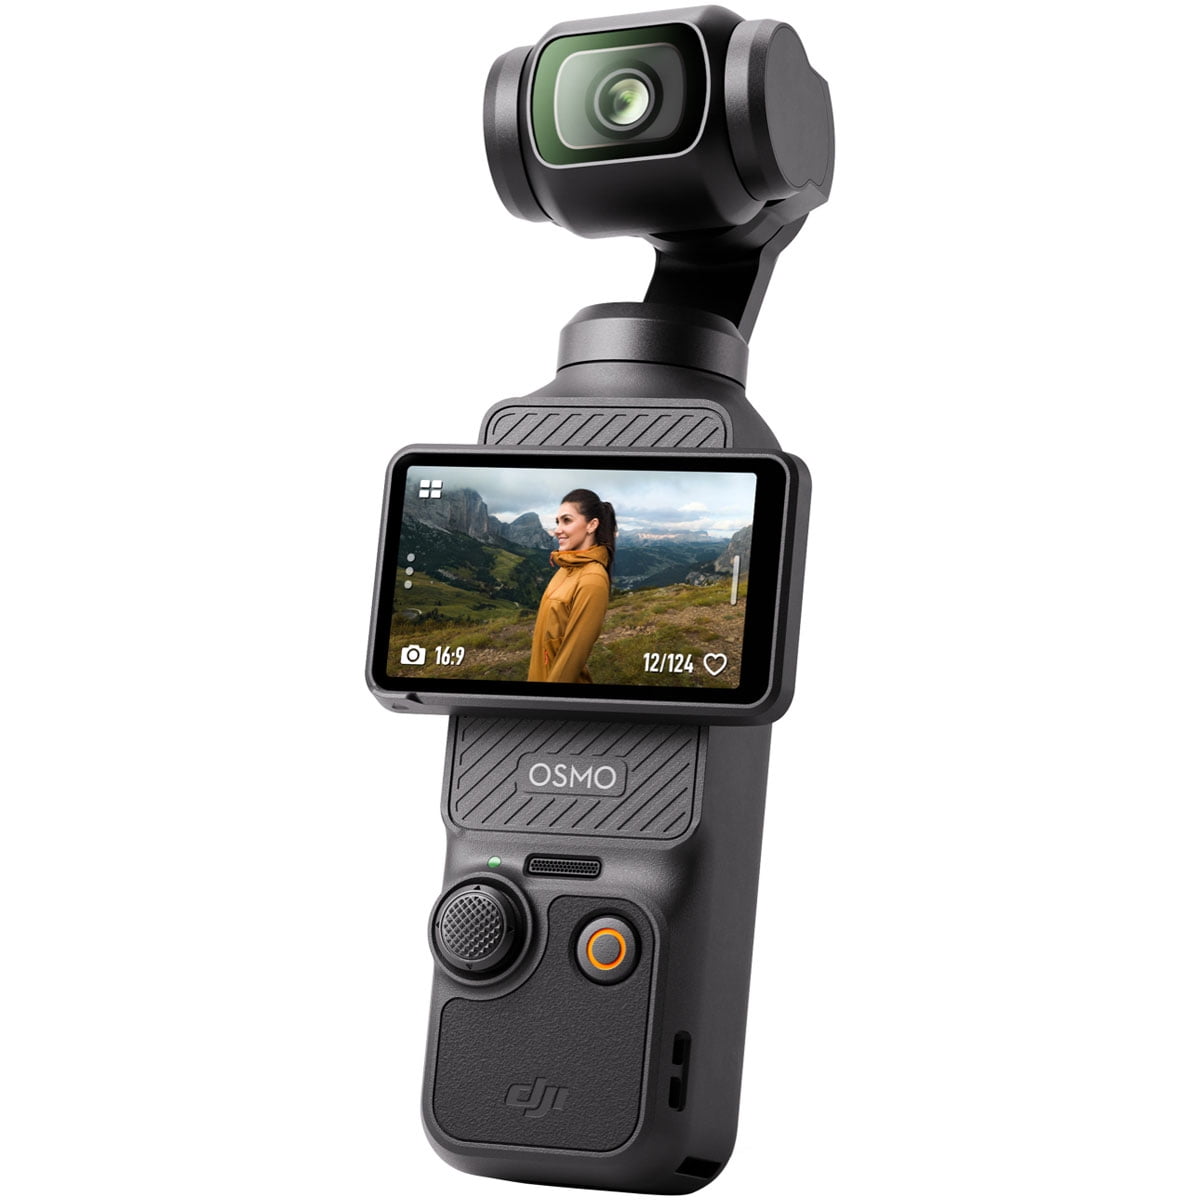 How the new DJI Pocket 2 camera compares to the Osmo Pocket - Gearbrain